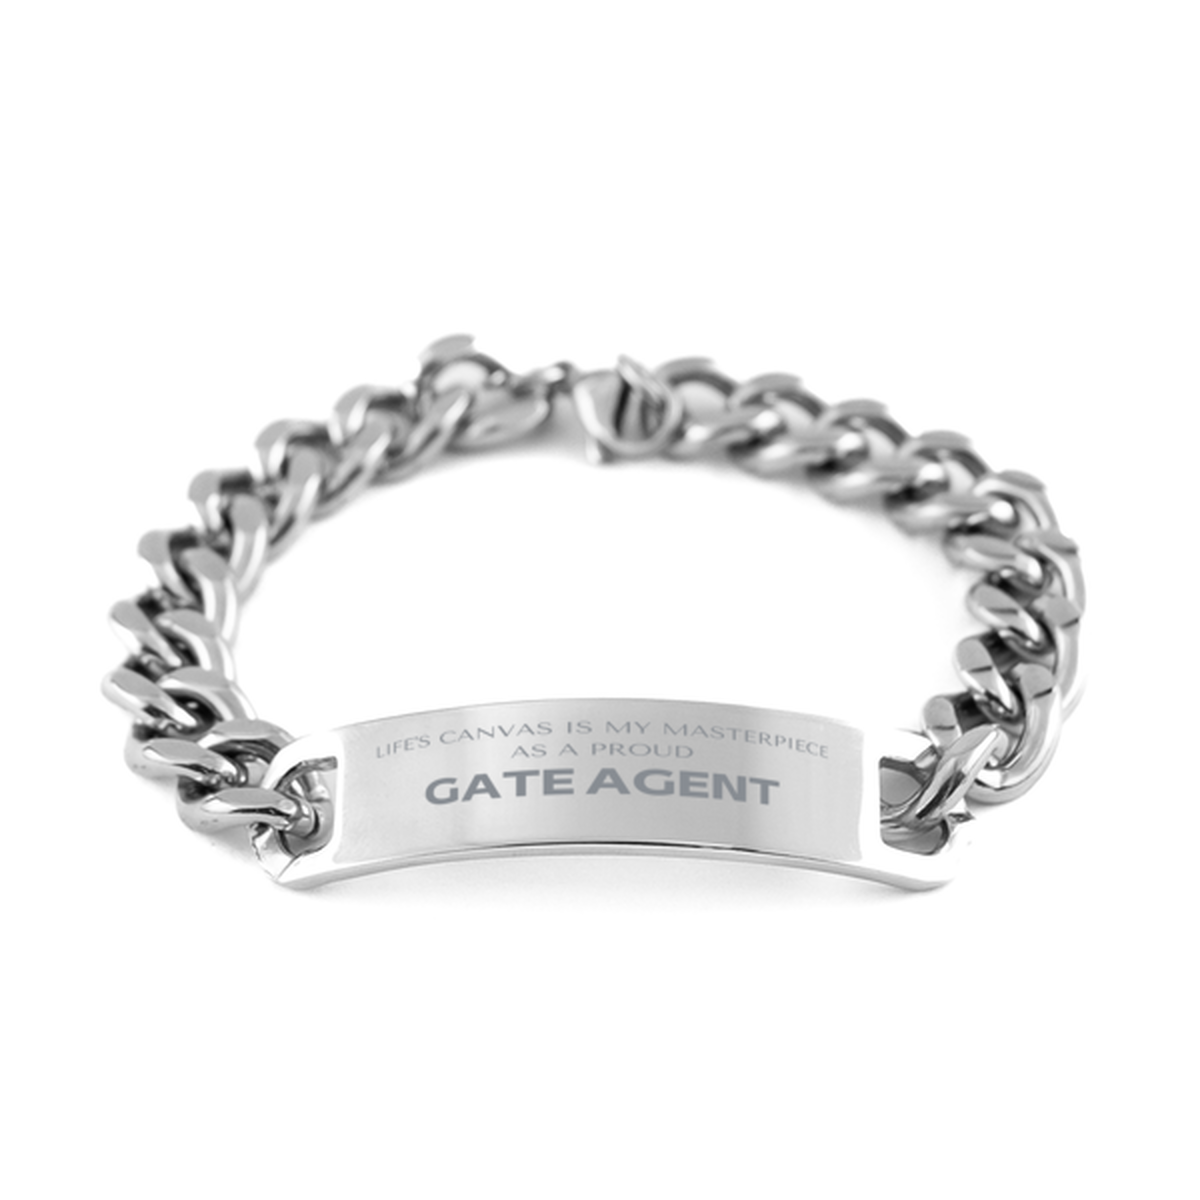 Proud Gate Agent Gifts, Life's canvas is my masterpiece, Epic Birthday Christmas Unique Cuban Chain Stainless Steel Bracelet For Gate Agent, Coworkers, Men, Women, Friends